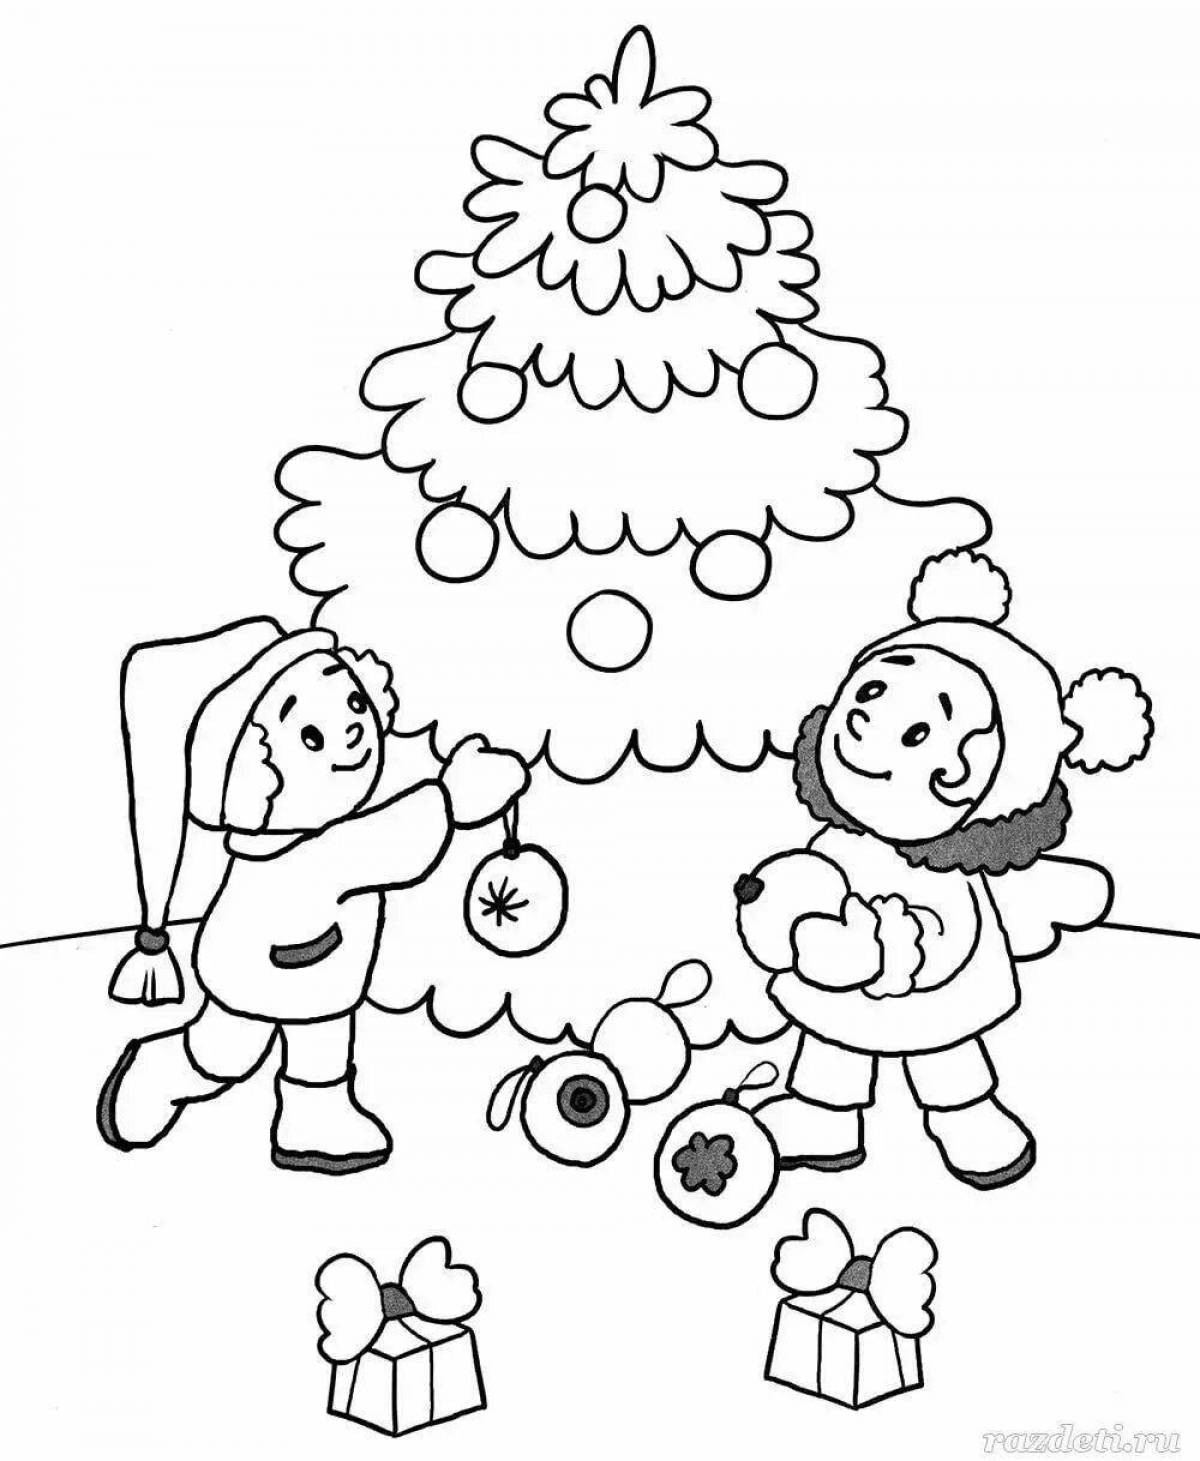 Adorable senior group winter coloring page